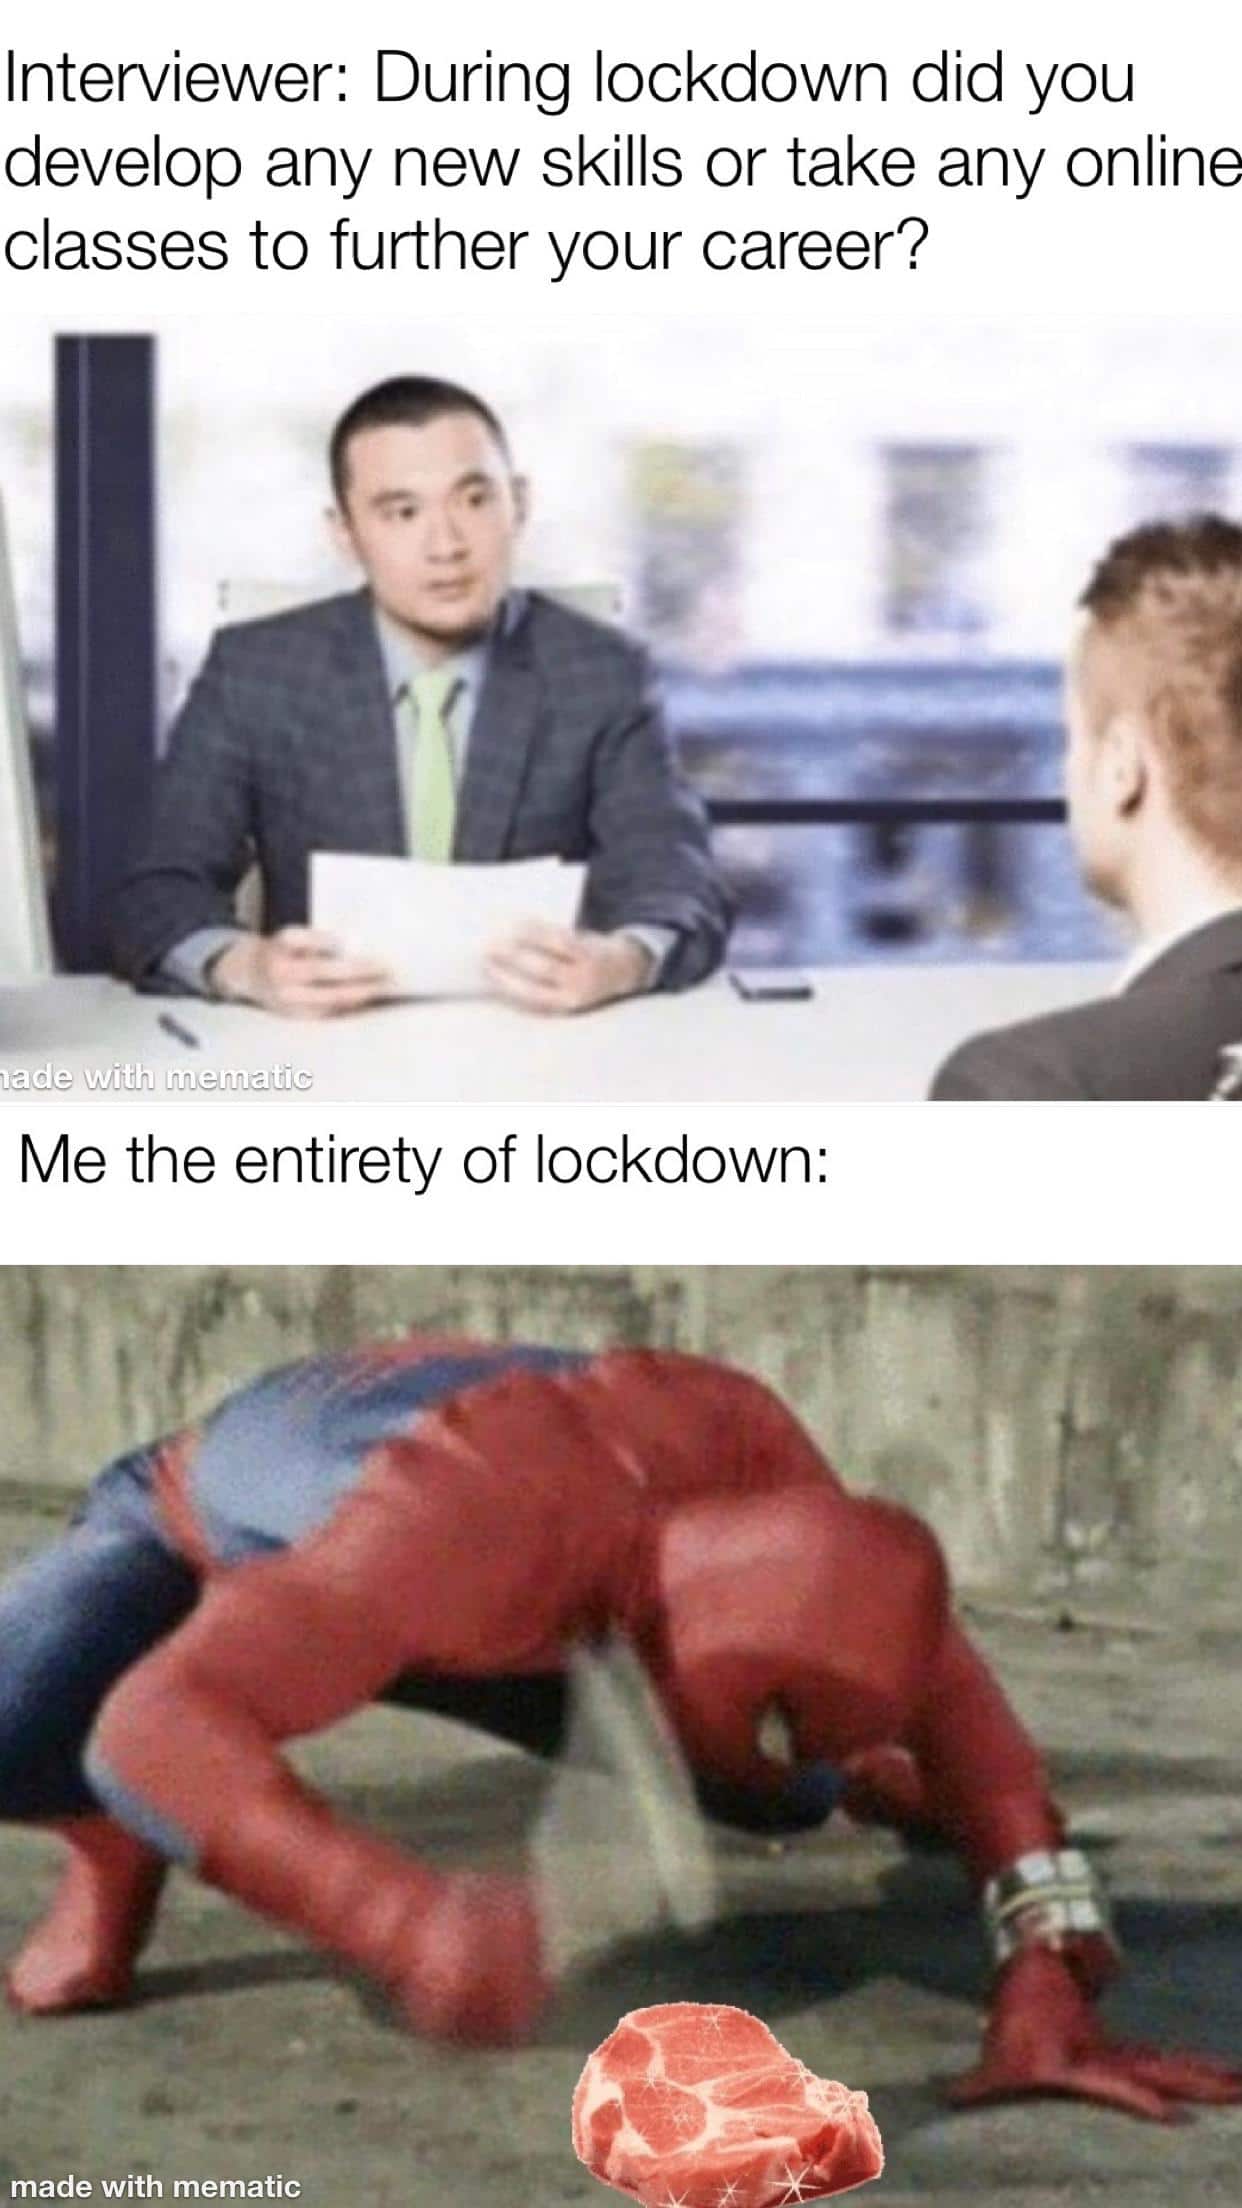 Thanos, Im Peter Avengers Memes Thanos, Im Peter text: Interviewer: During lockdown did you develop any new skills or take any online classes to further your career? Me the entirety of lockdown: made with mematic 